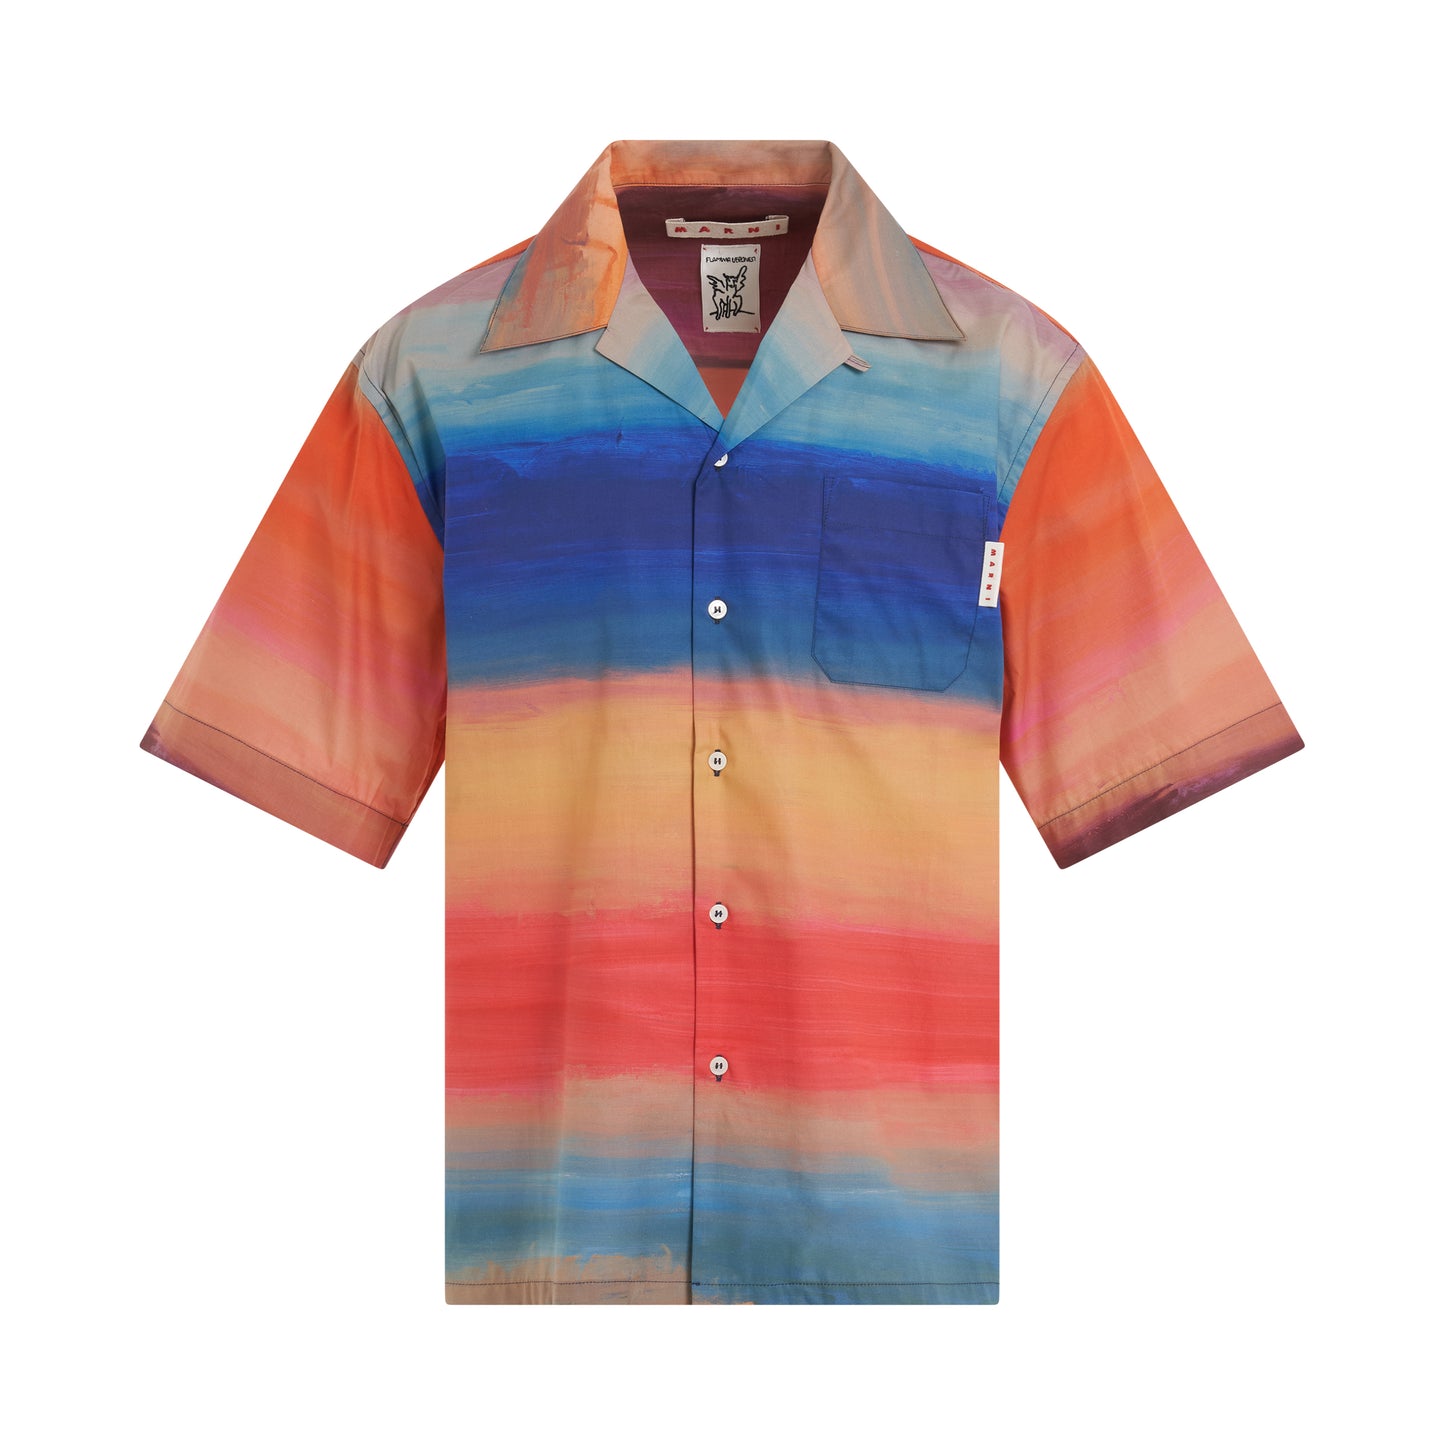 Dark Side of the Moon Bowling Shirt in Multicolour